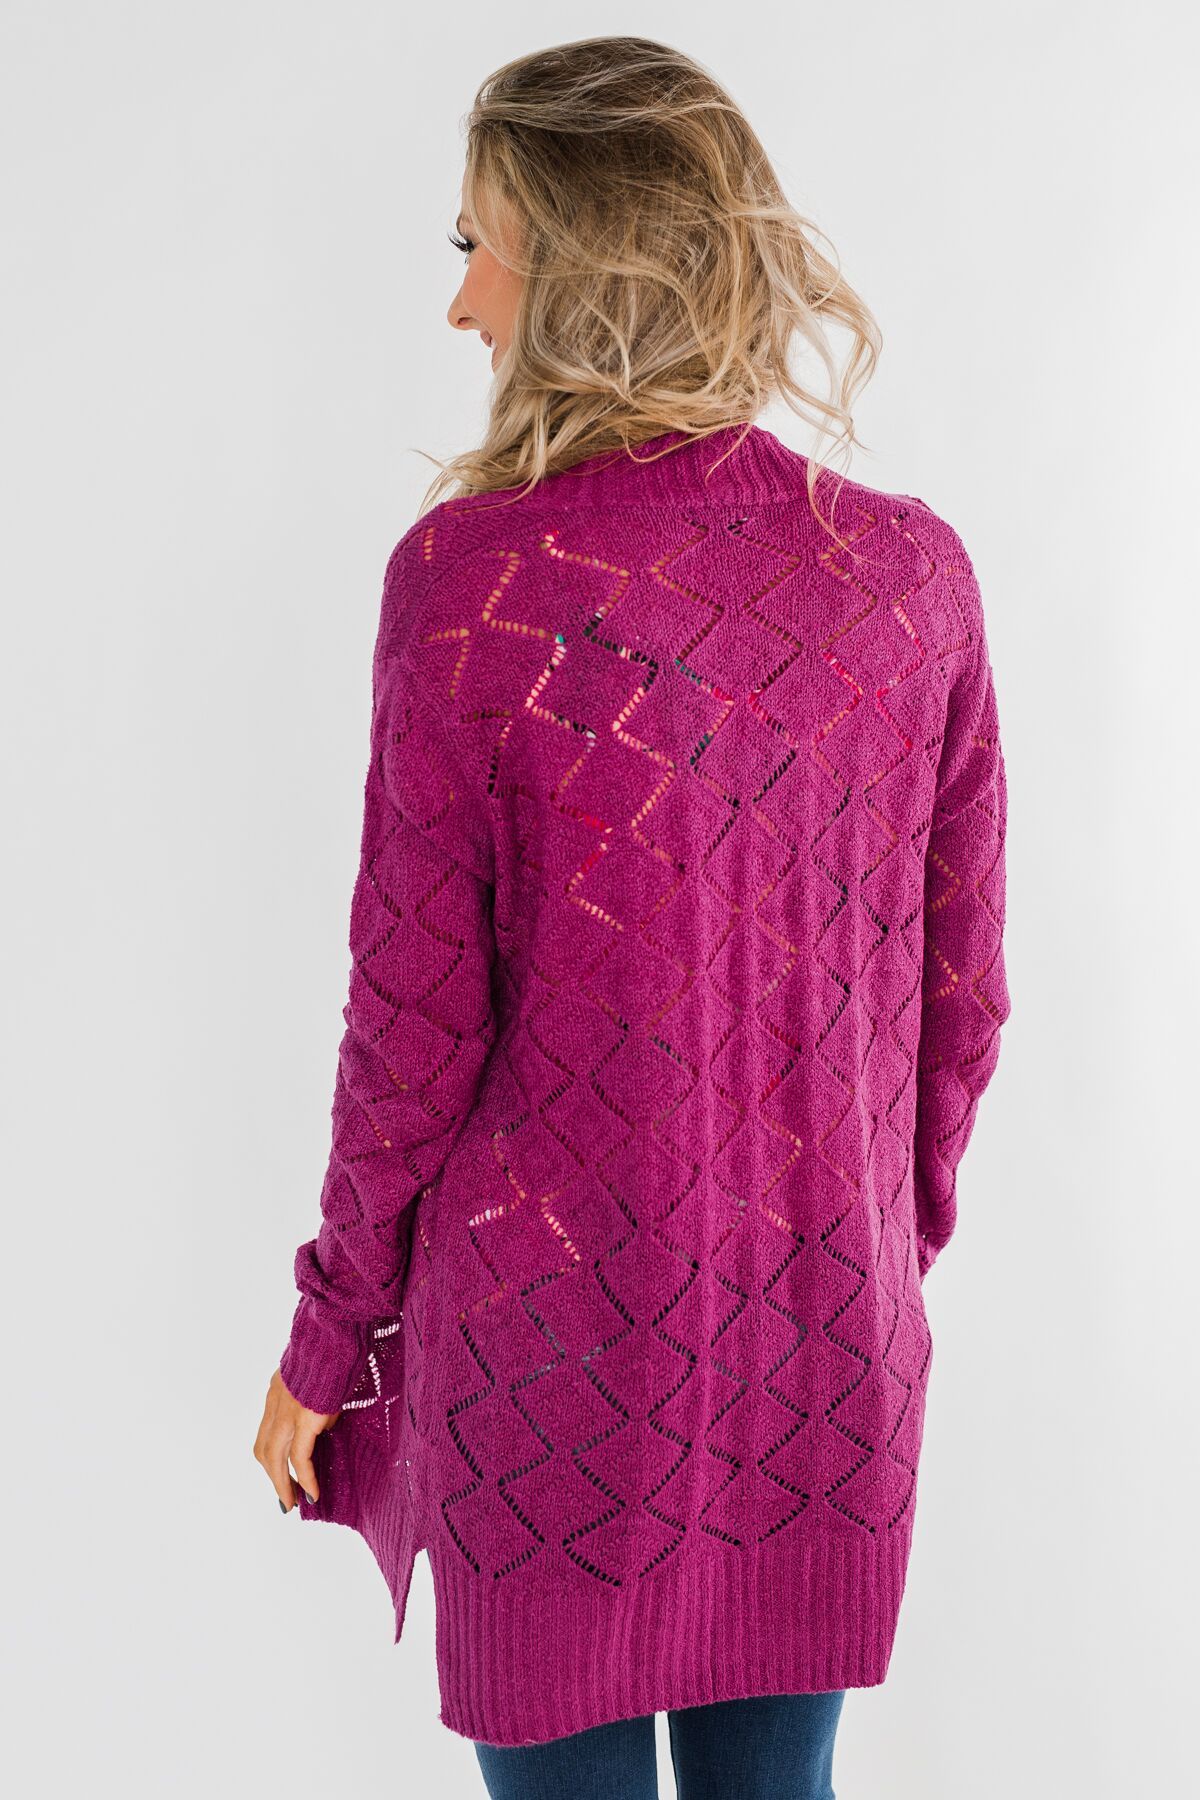 Knit Pointelle Cardigan- Magenta – The Pulse Boutique